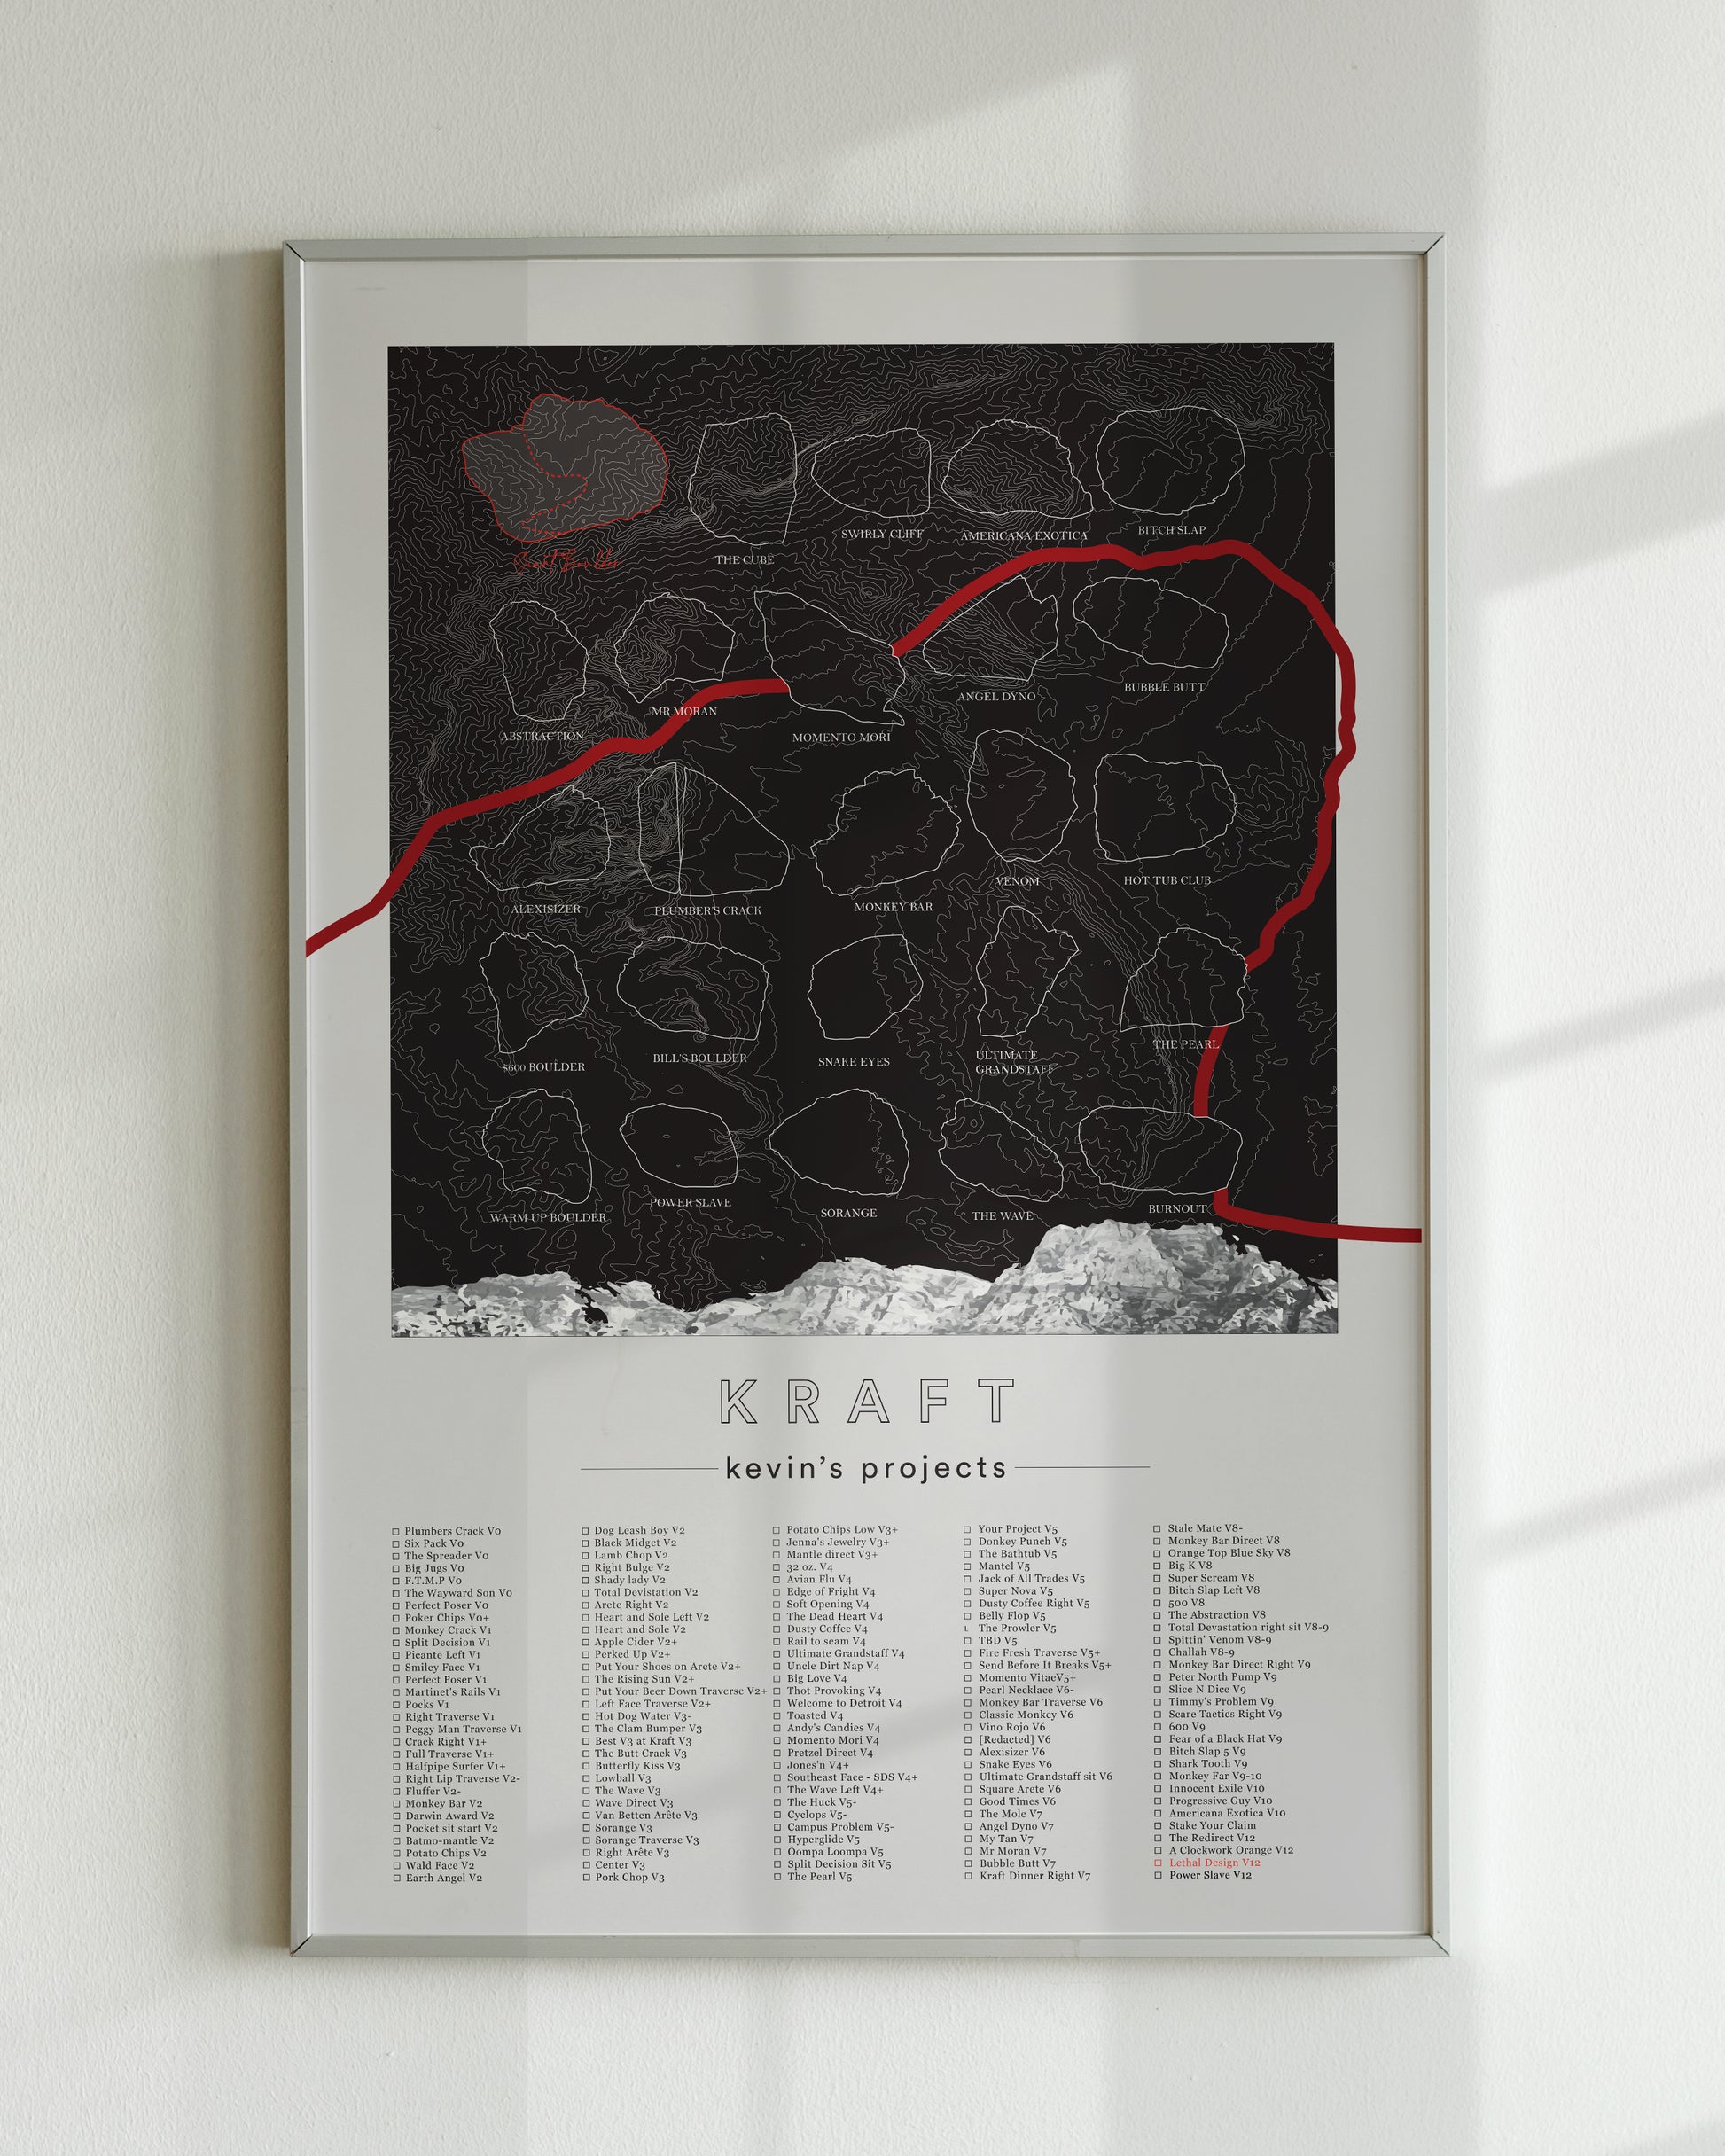 A black color, customized rock climbing ticklist poster for the Kraft rock climbing location at the Red Rocks in Las Vegas, Nevada. The design has an overlay of crag topography, nature landscapes, and traced boulders, the person's name, and a list of bouldering problems at the bottom. Displayed as wall art in a living room.